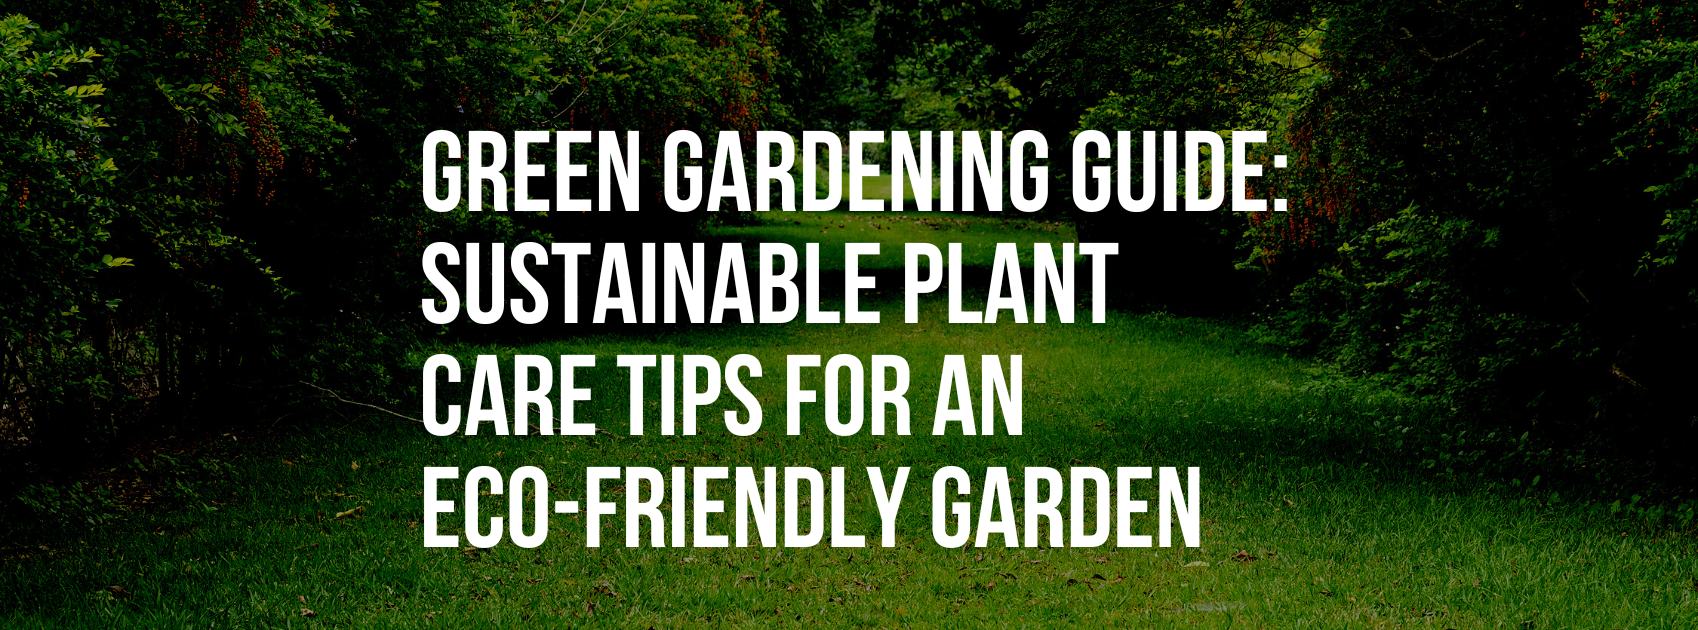 Green Gardening Guide: Sustainable Plant Care Tips for an Eco-Friendly Garden